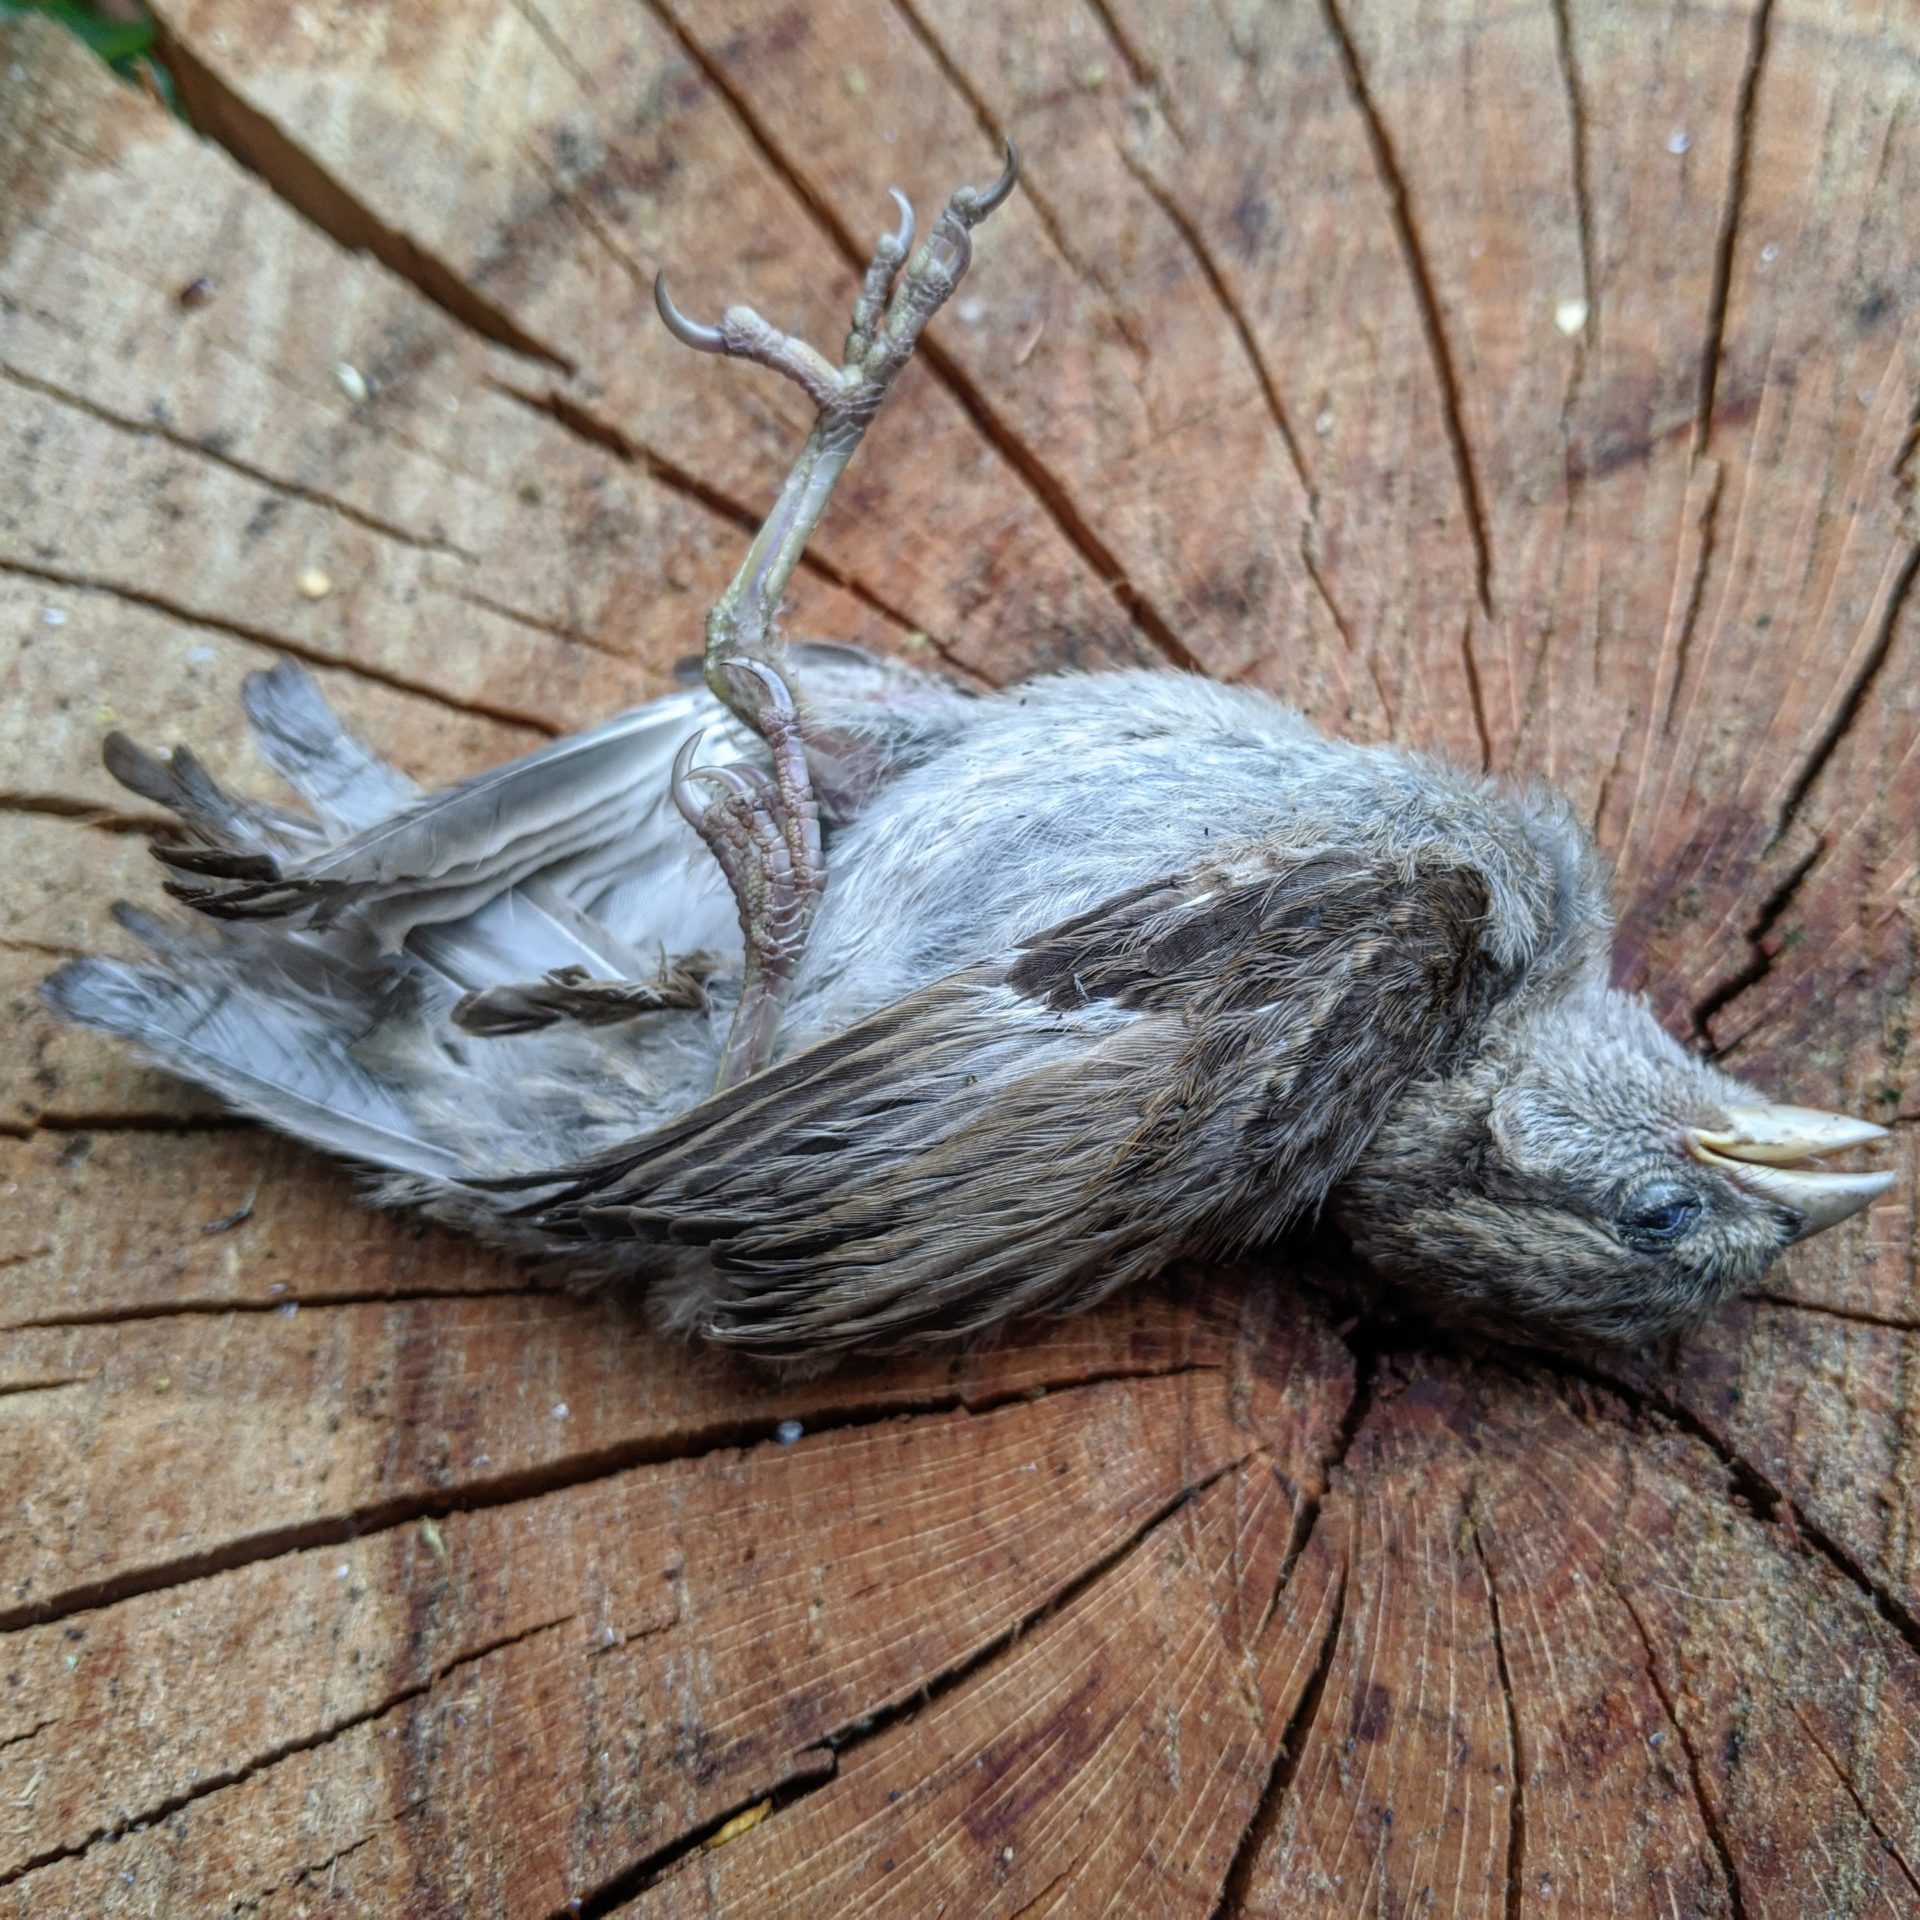 22052020 - Hillridge Springwatch presents yet another fatality, female sparrow with broken wing